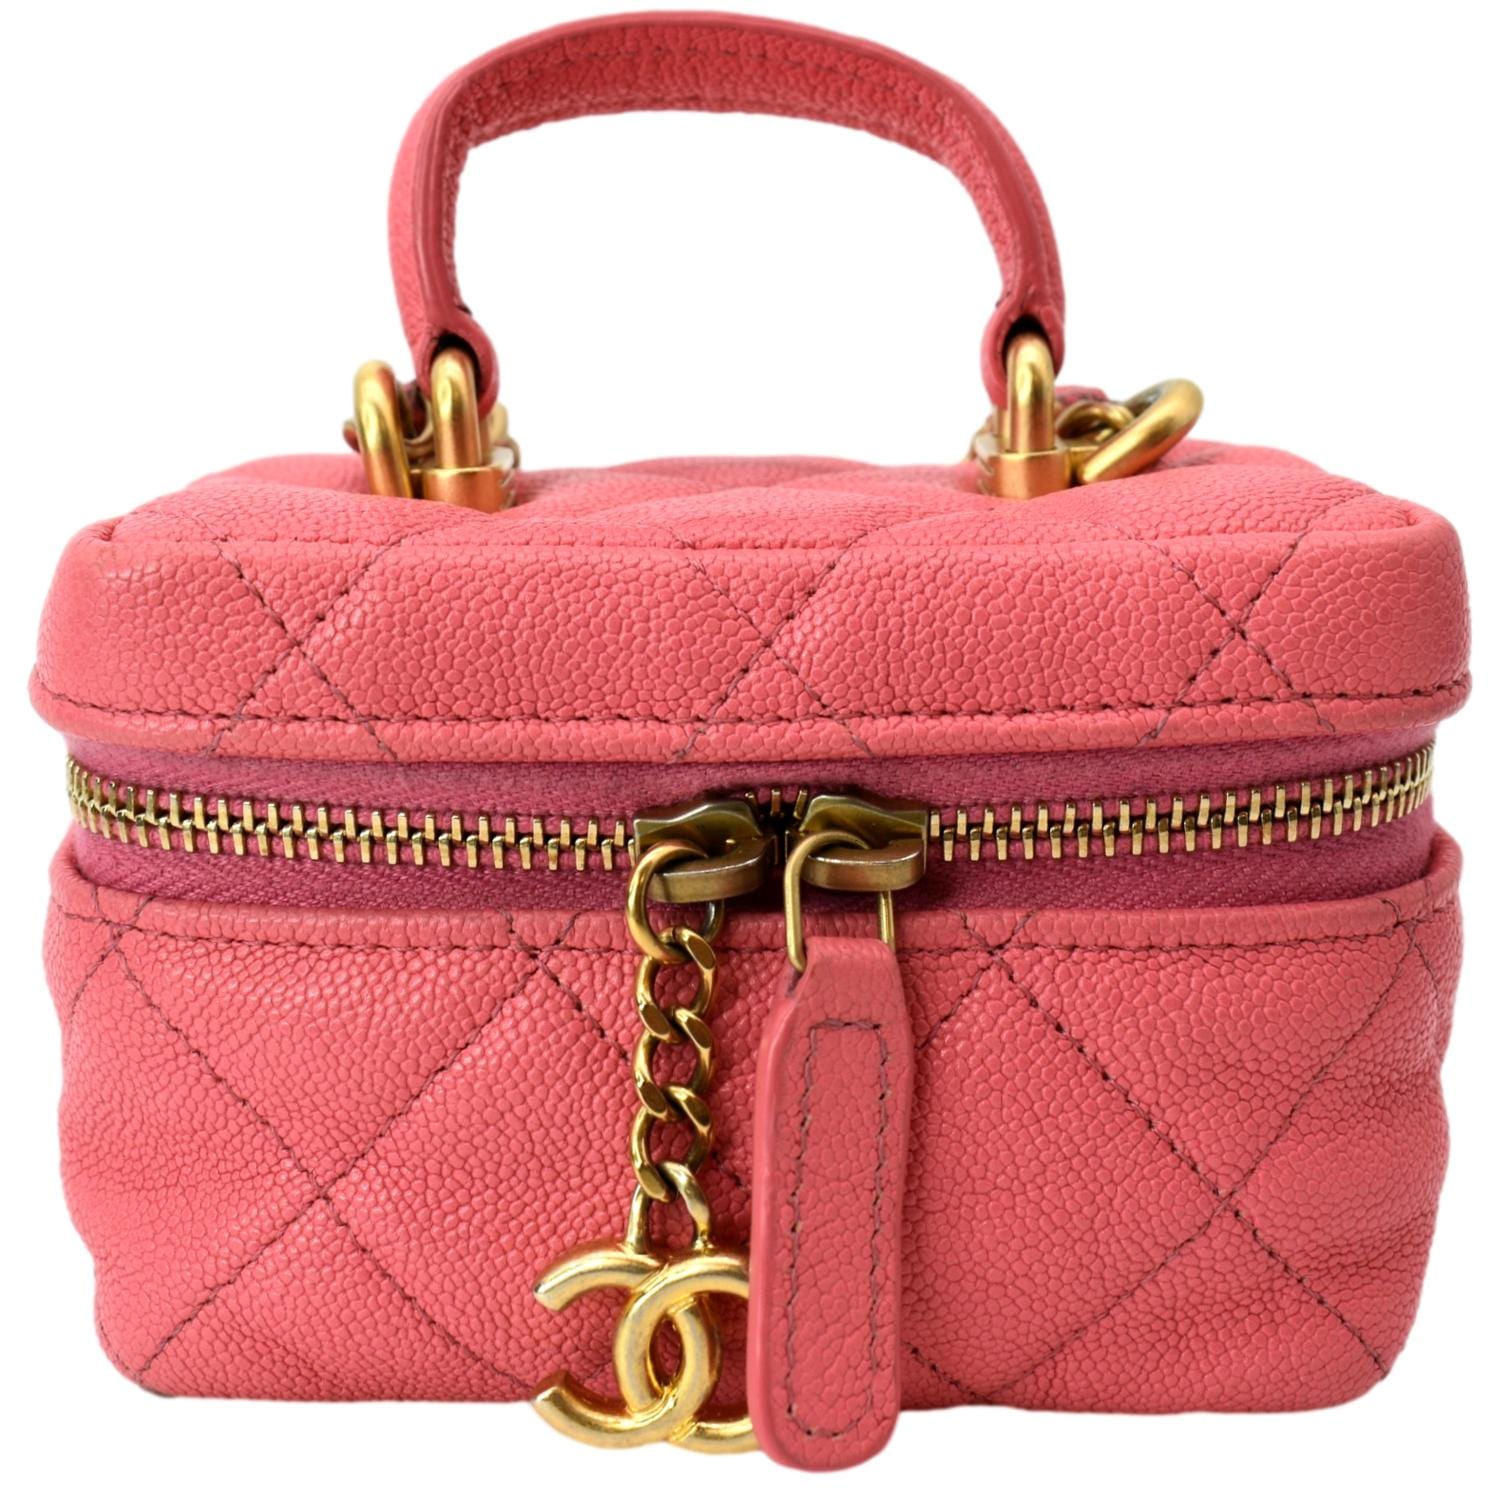 Chanel Small Vanity With Chain Bag In Neon Pink Patent Leather